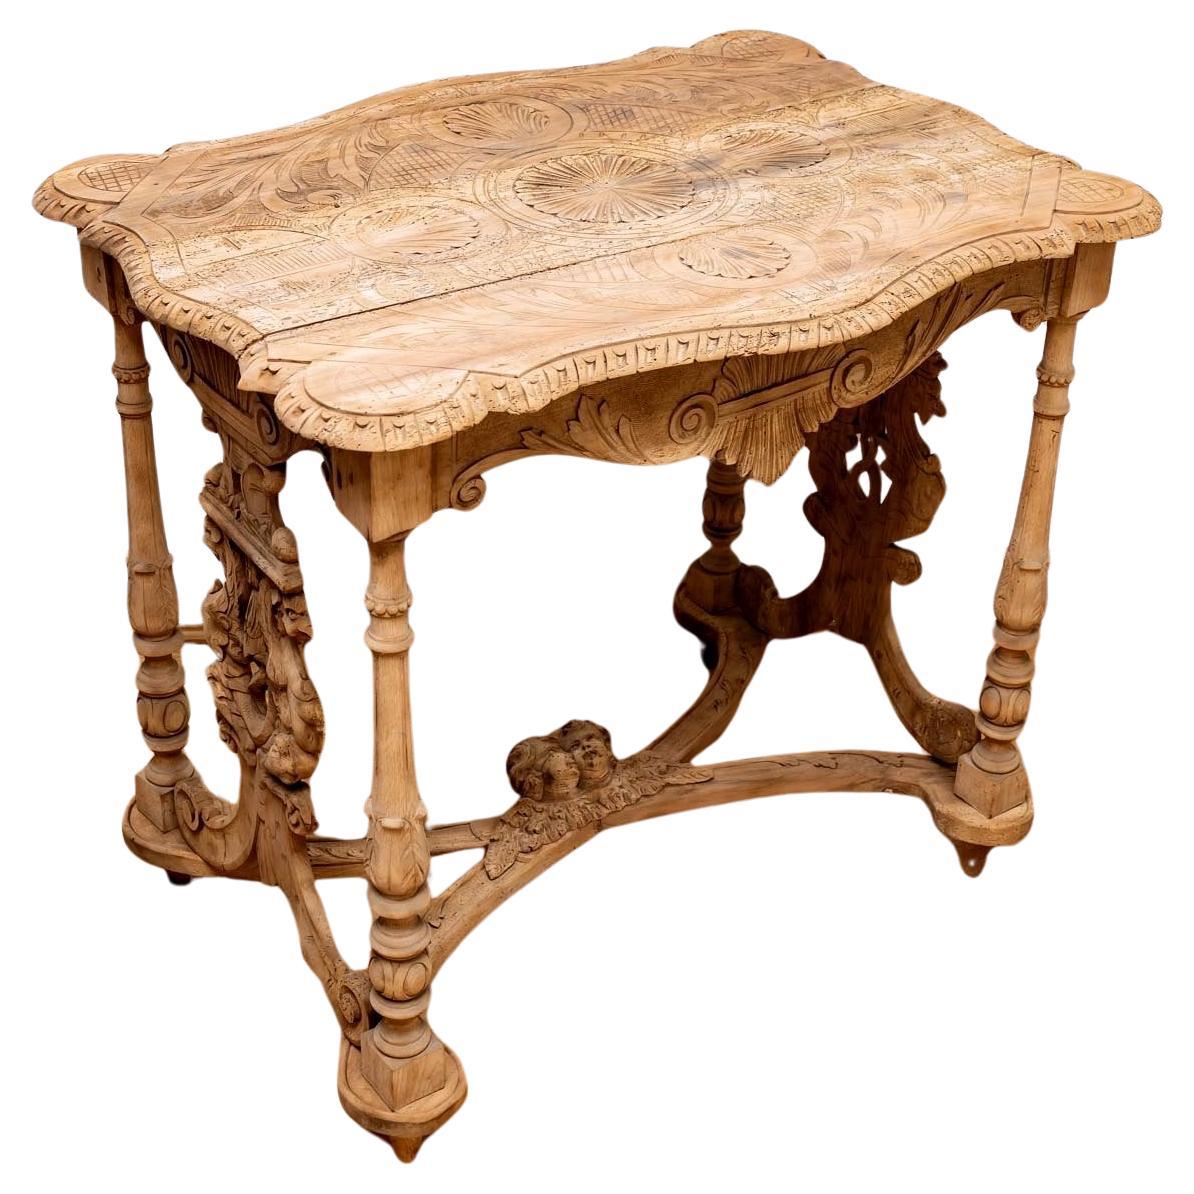 Table In Solid Walnut - Decor With Putti - Style: Neo-renaissance - Period: XIXt For Sale